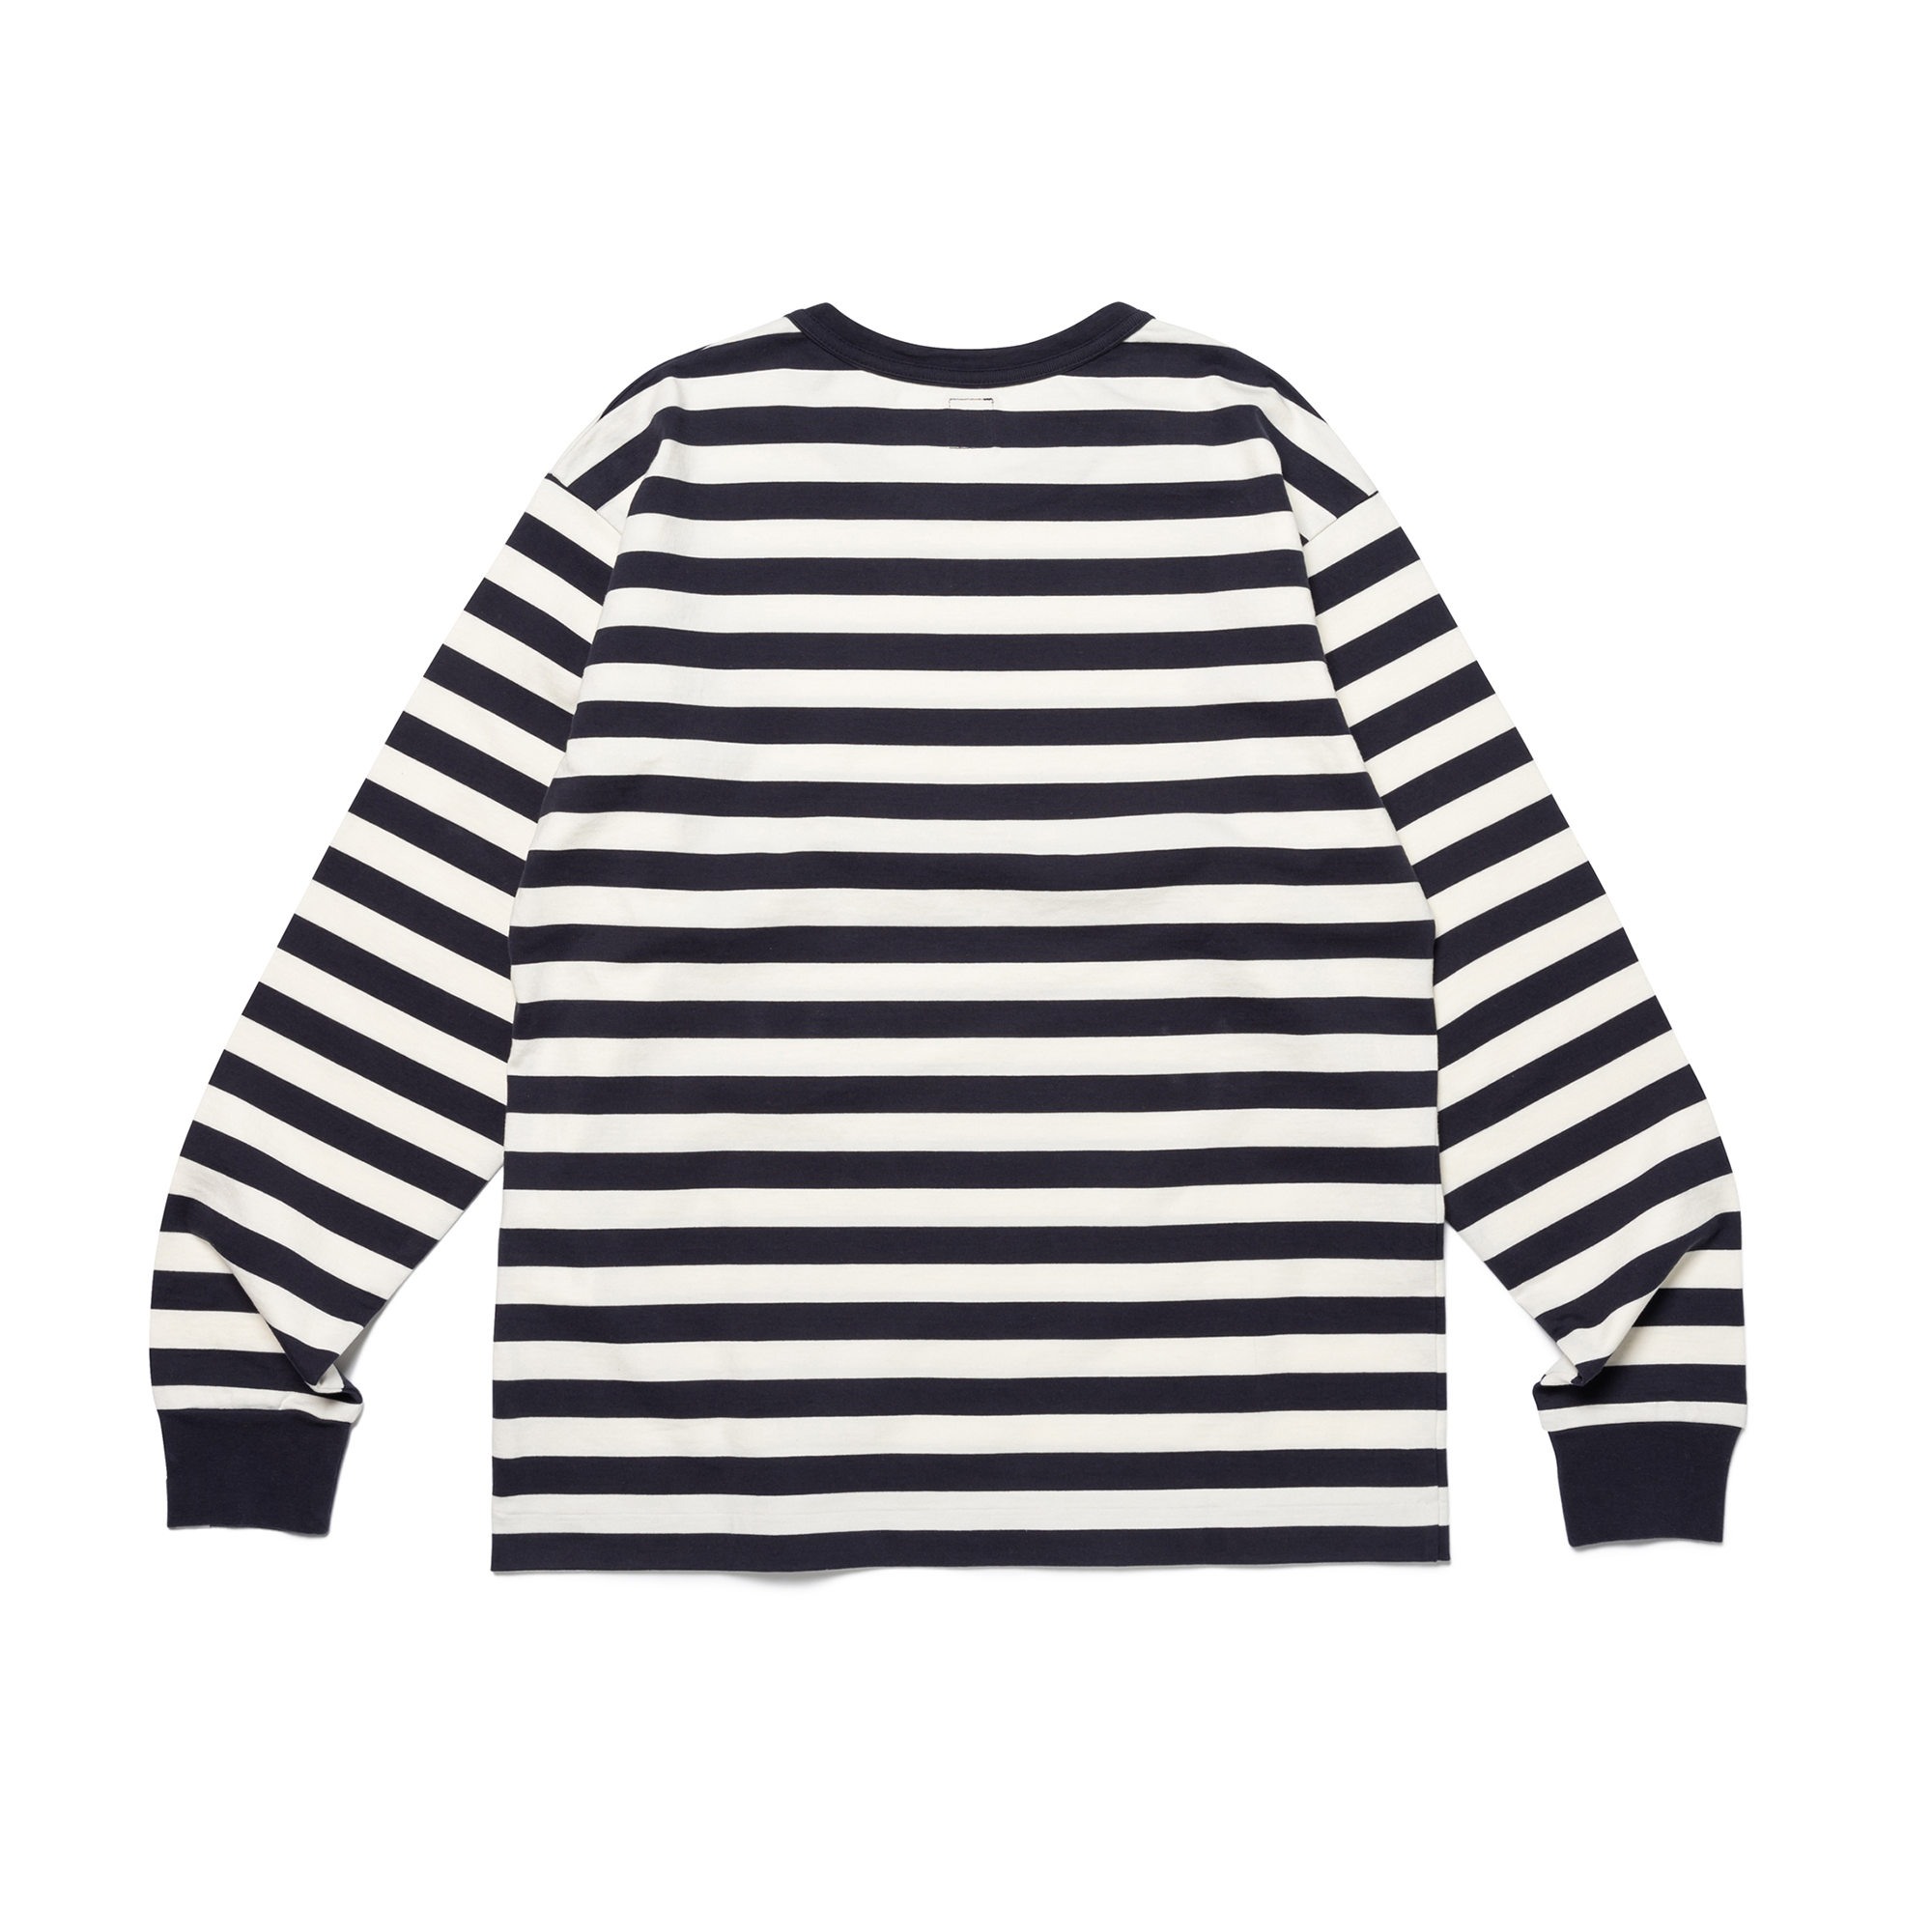 Human Made   Striped L/S T Shirt   Navy   HMCS – Laced